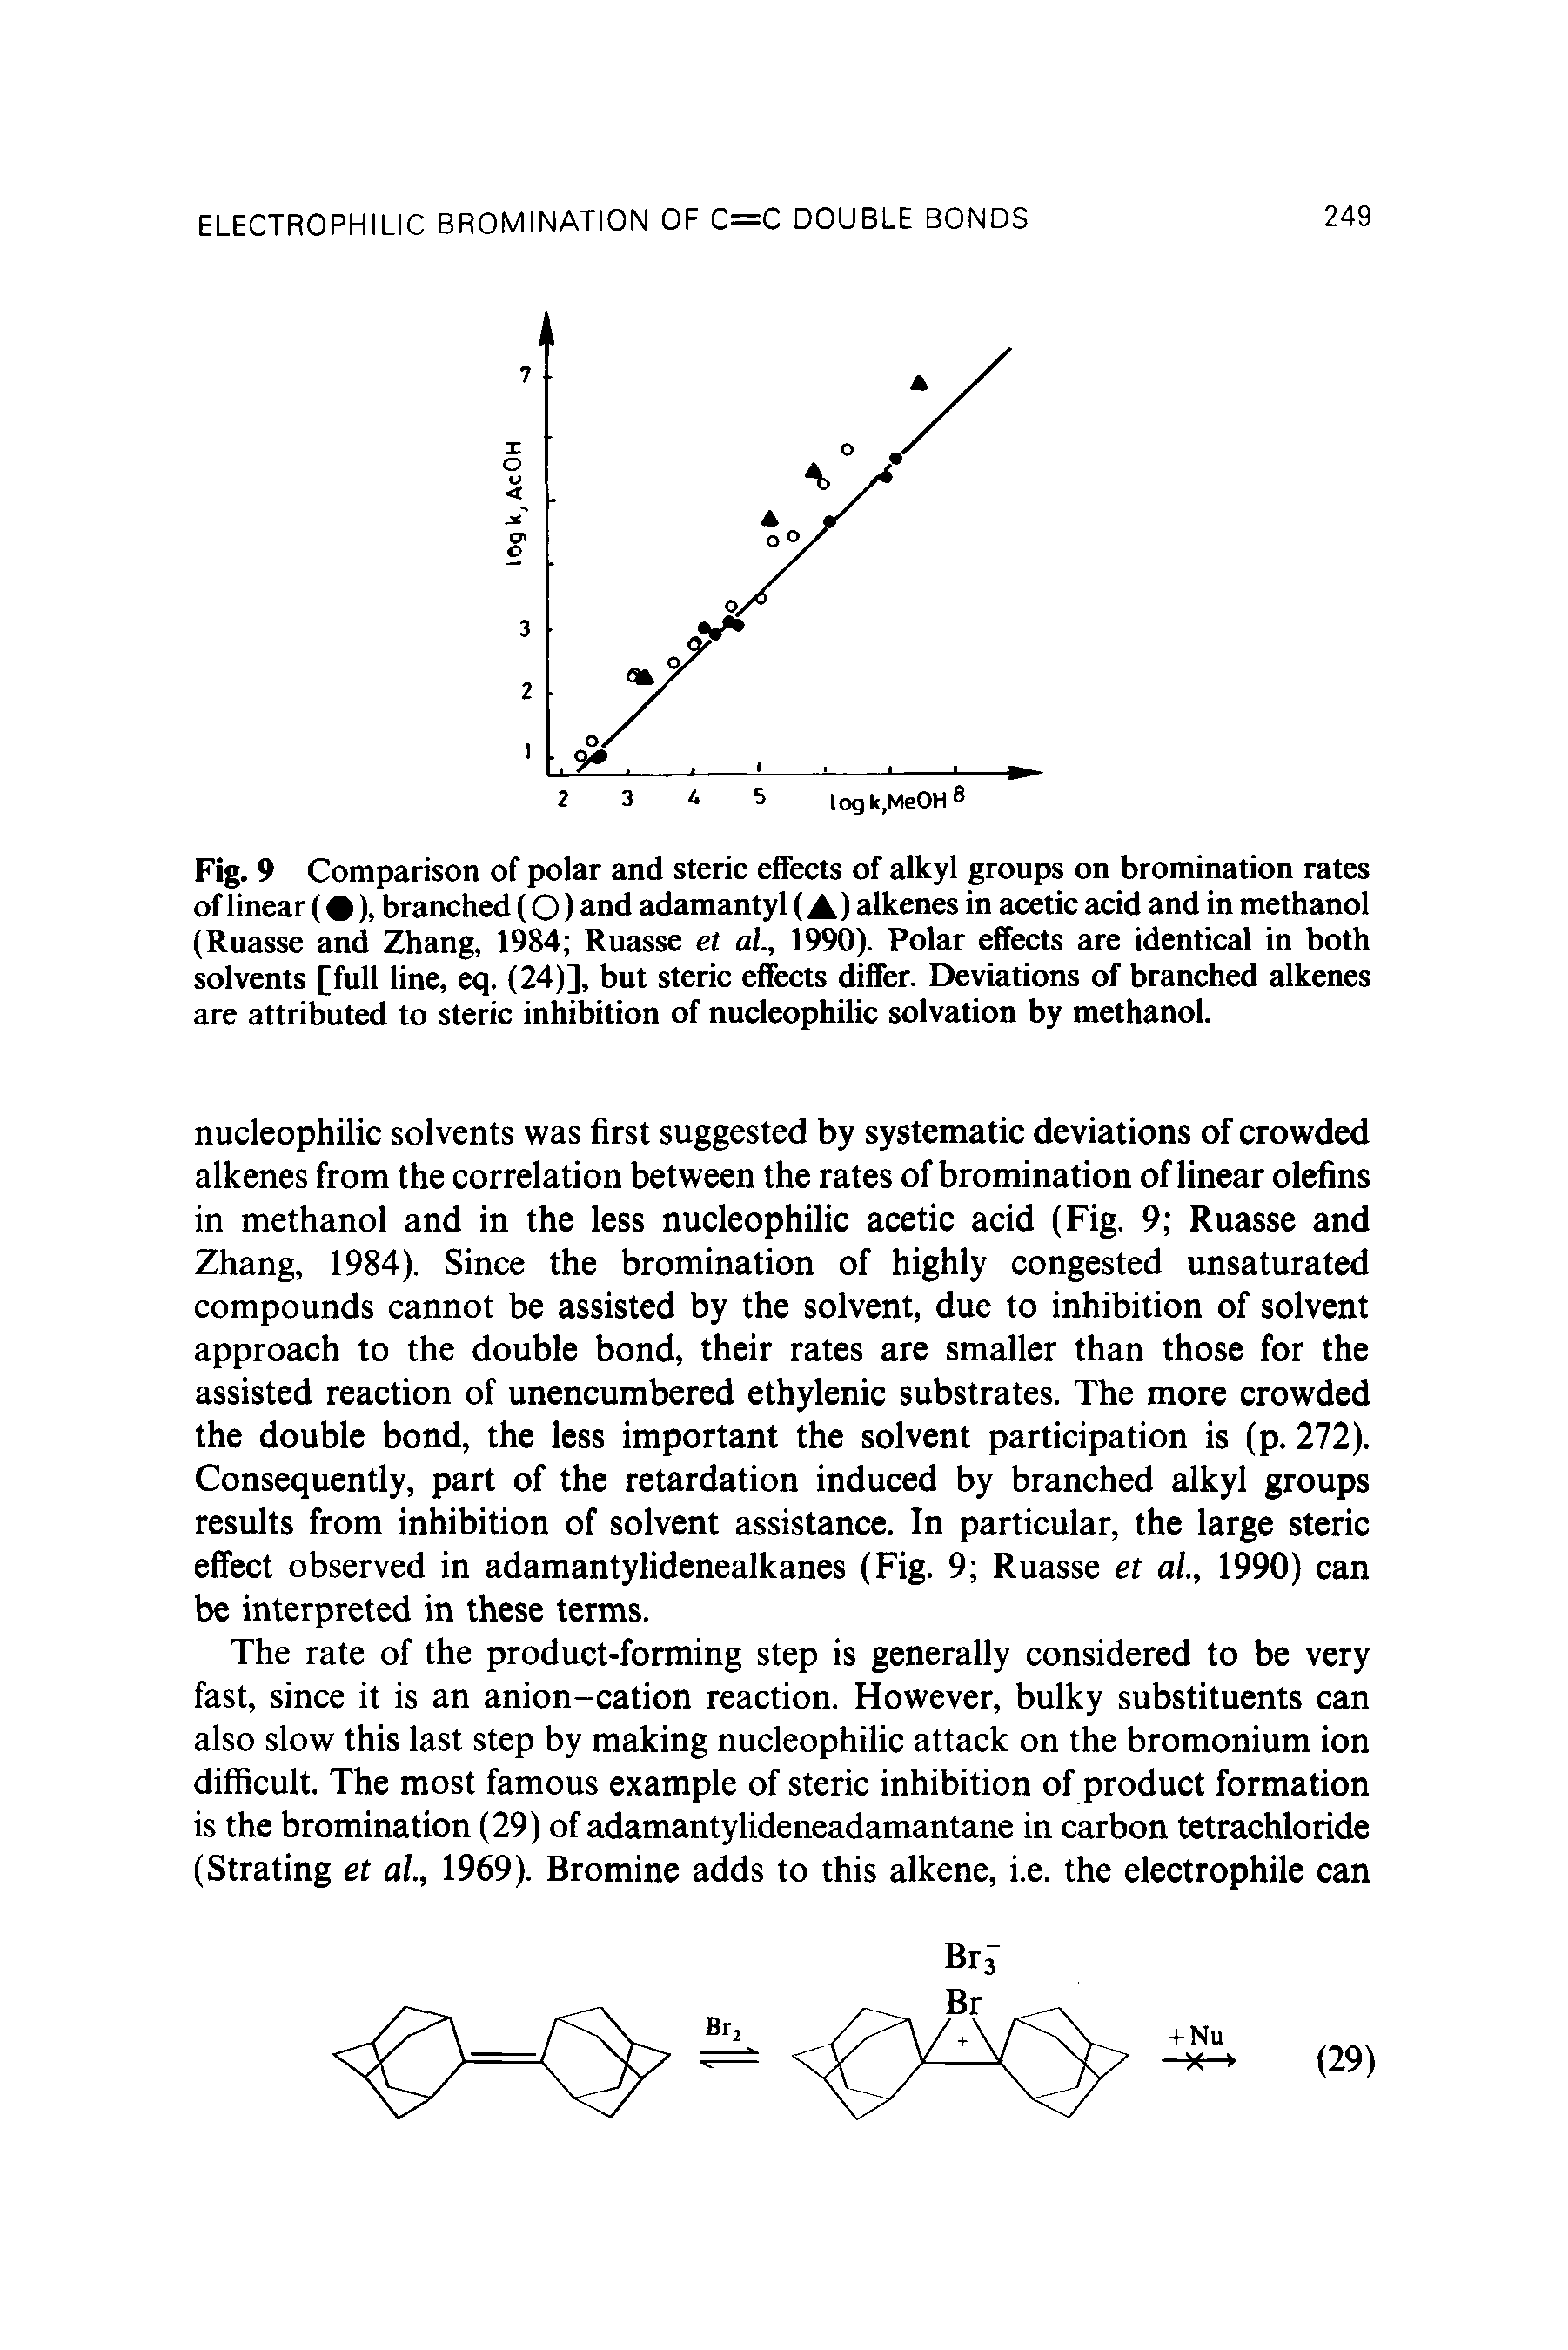 Fig. 9 Comparison of polar and steric effects of alkyl groups on bromination rates of linear ( ), branched (O) and adamantyl (A) alkenes in acetic acid and in methanol (Ruasse and Zhang, 1984 Ruasse et al., 1990). Polar effects are identical in both solvents [full line, eq. (24)], but steric effects differ. Deviations of branched alkenes are attributed to steric inhibition of nucleophilic solvation by methanol.